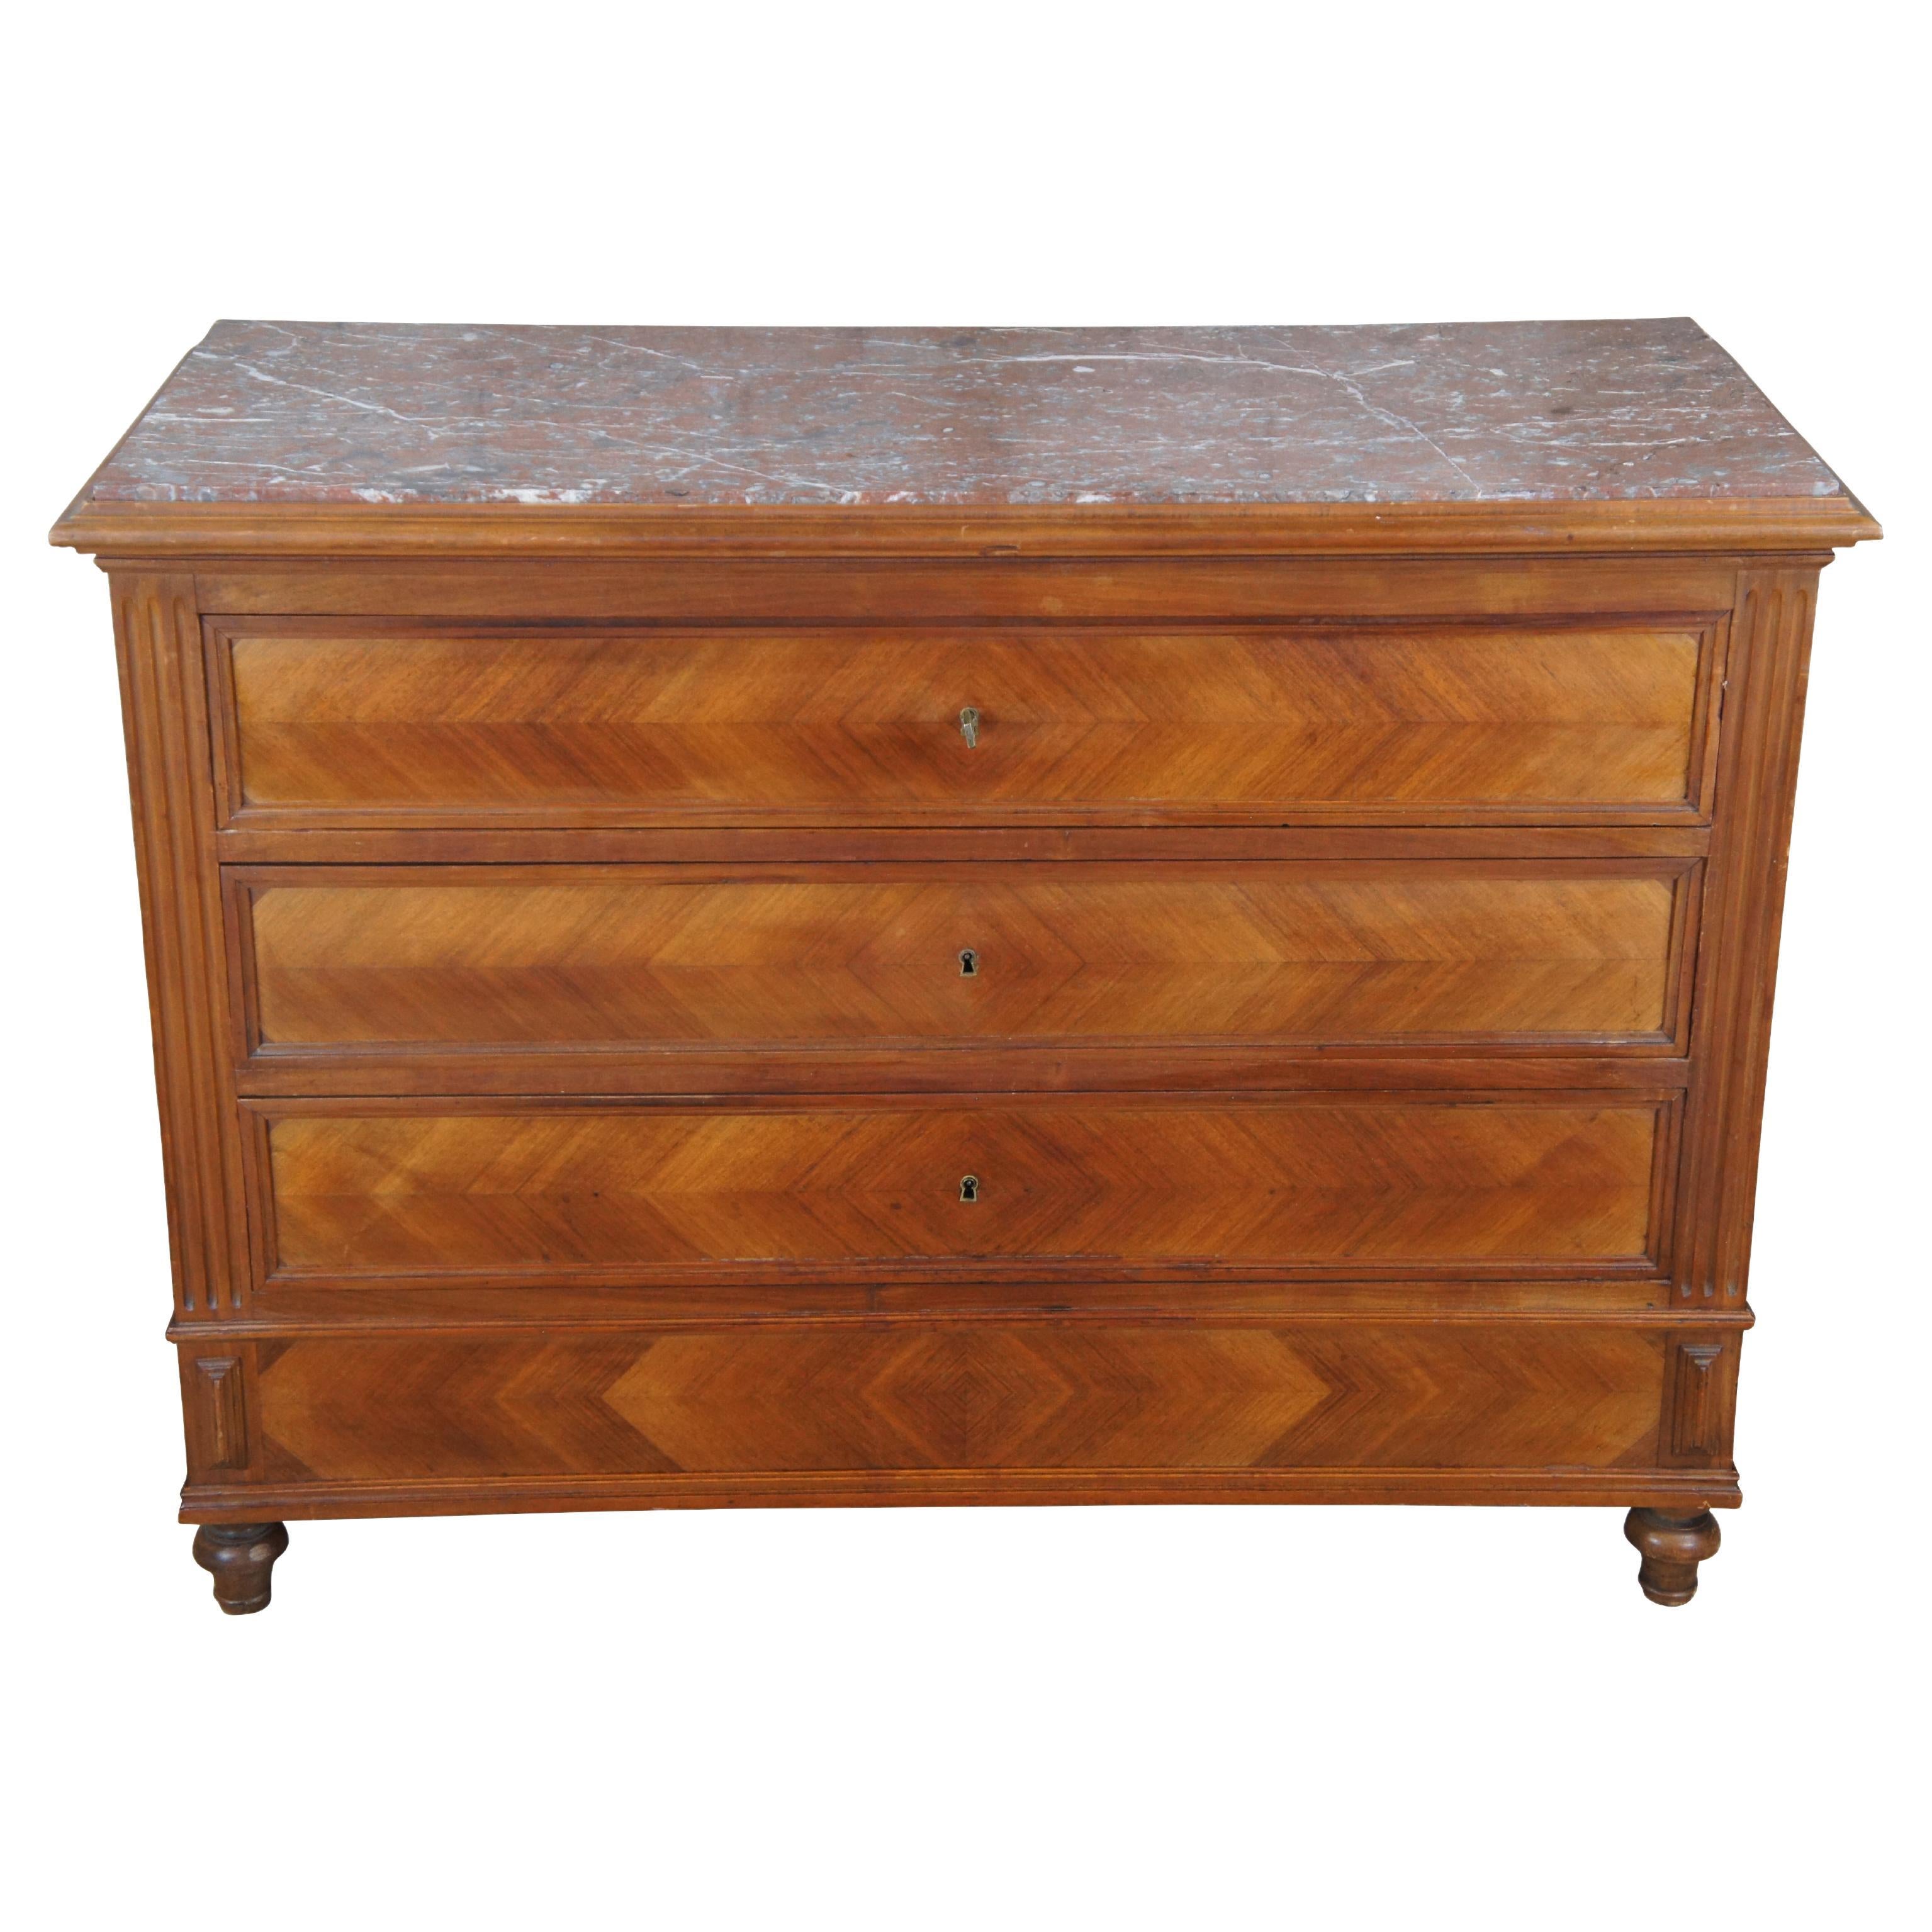 Antique 19th C. French Louis Philippe Matchbook Walnut Commode Chest of Drawers For Sale